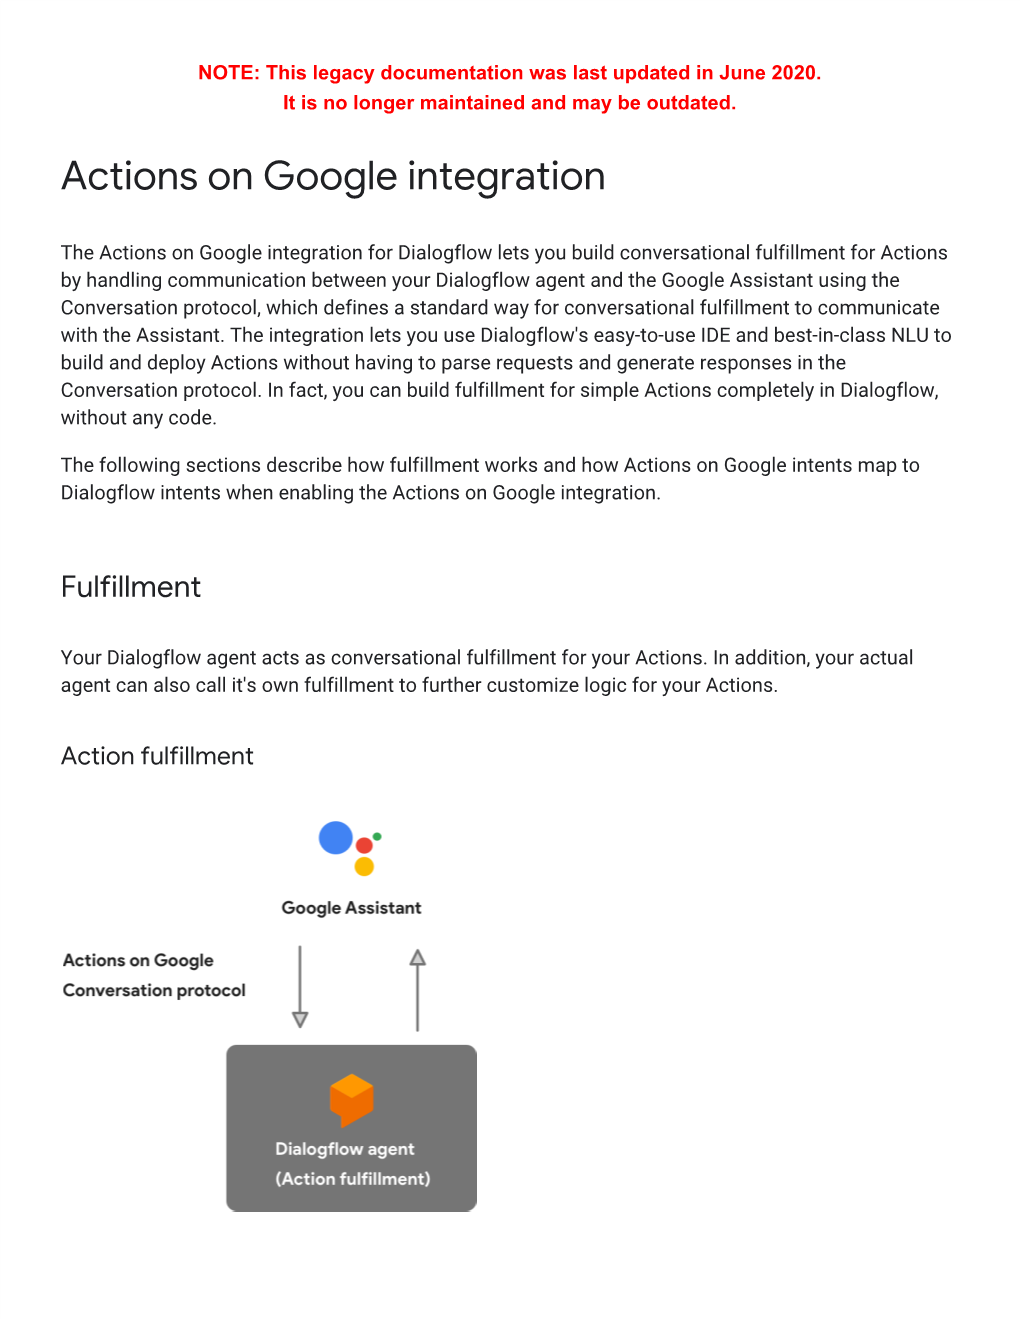 Actions on Google Integration